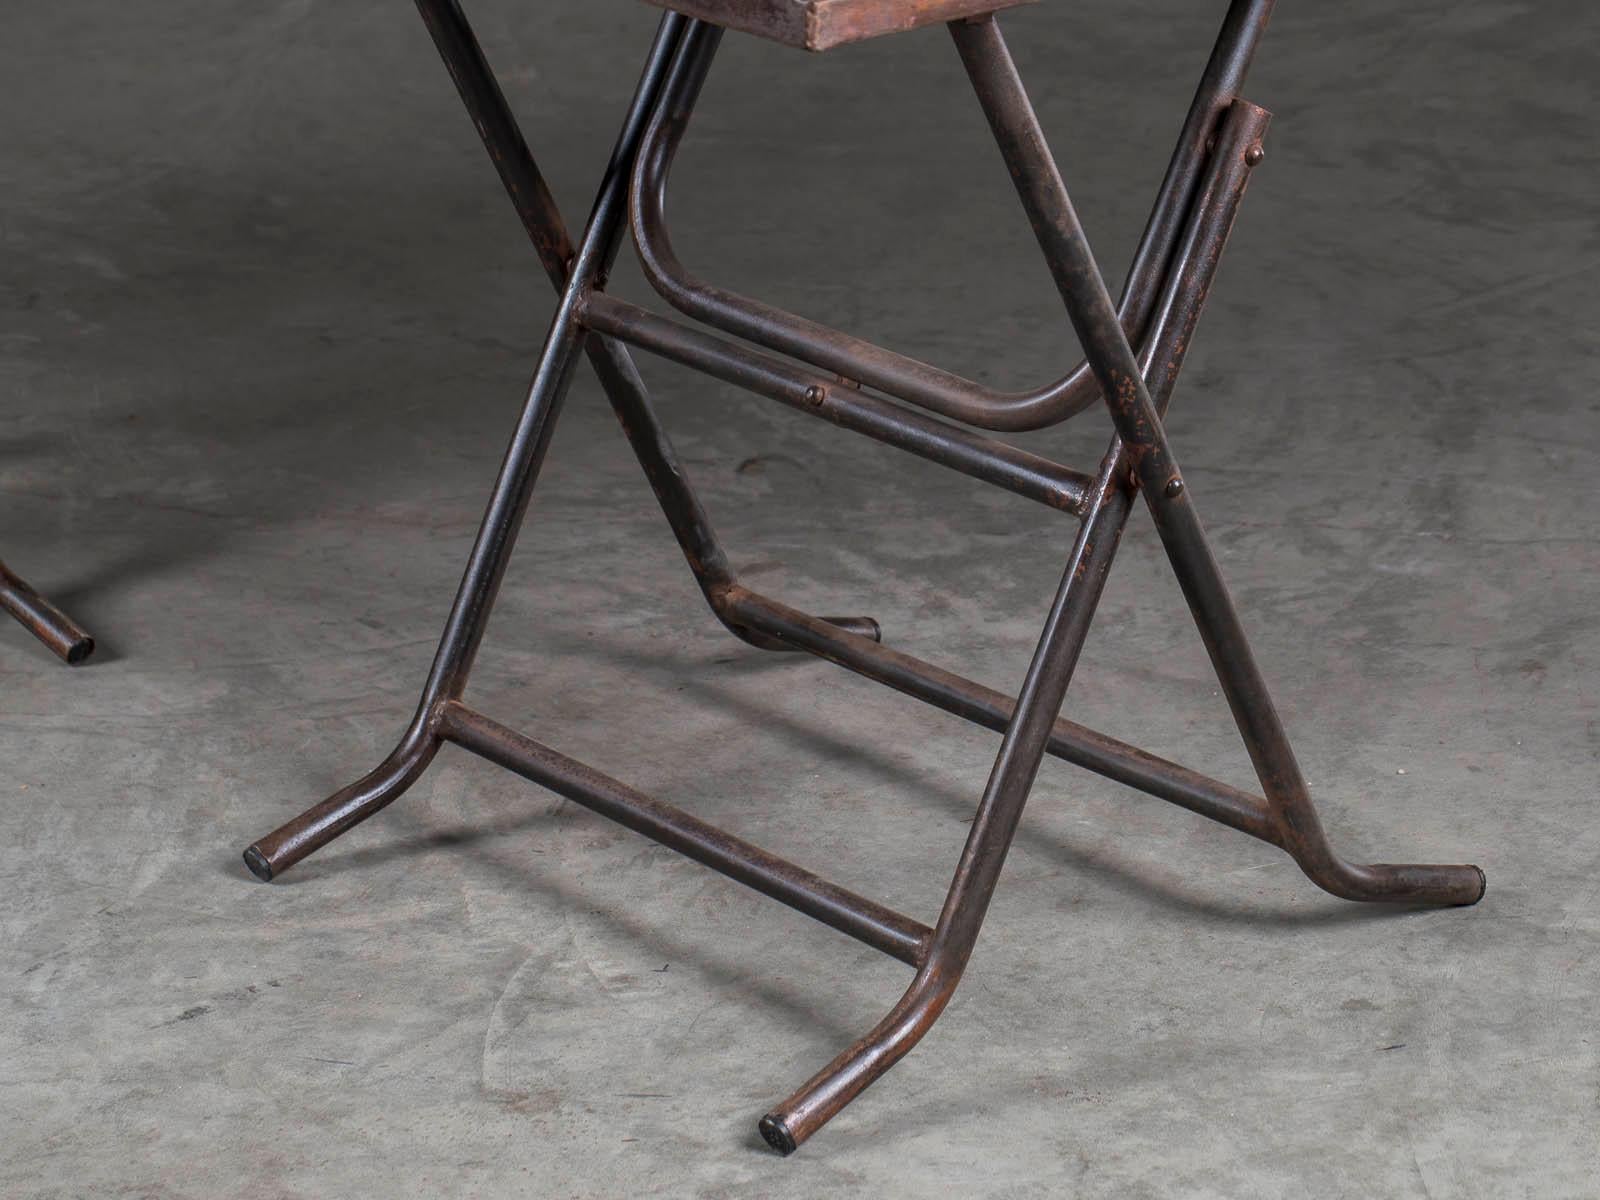 Contemporary Pair of Square Metal Folding Tables Tubular Metal Legs Found in Asia